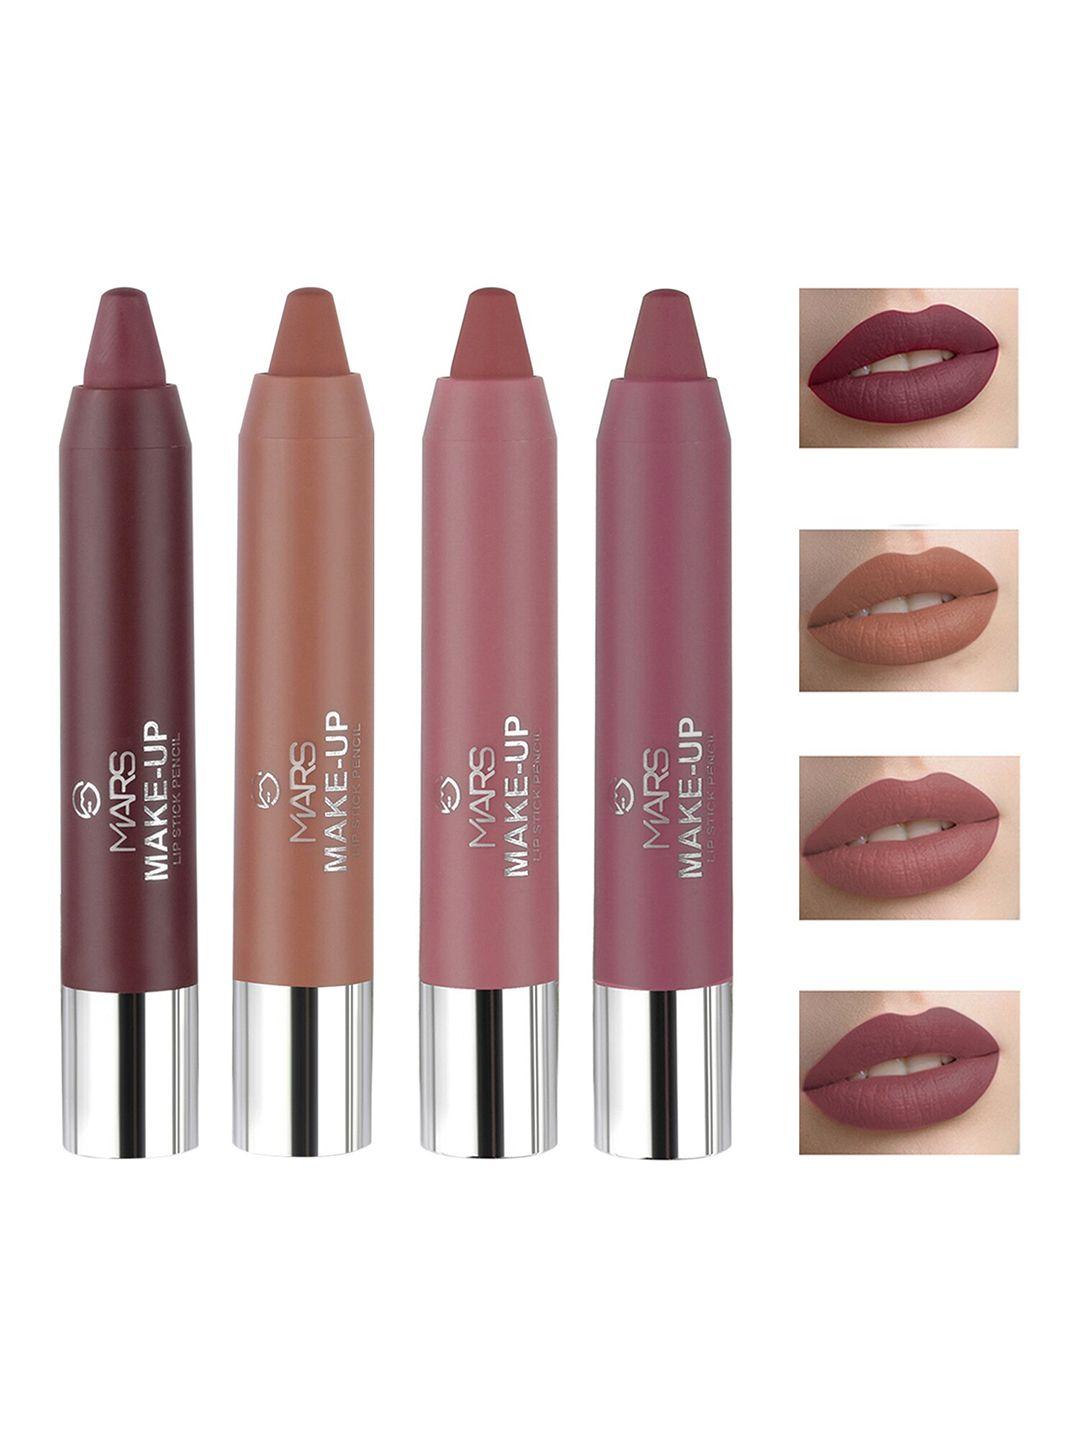 MARS Set of 4 Smooth & Pigmented Lipstick Pencil 3.6 g Each - Shade-F